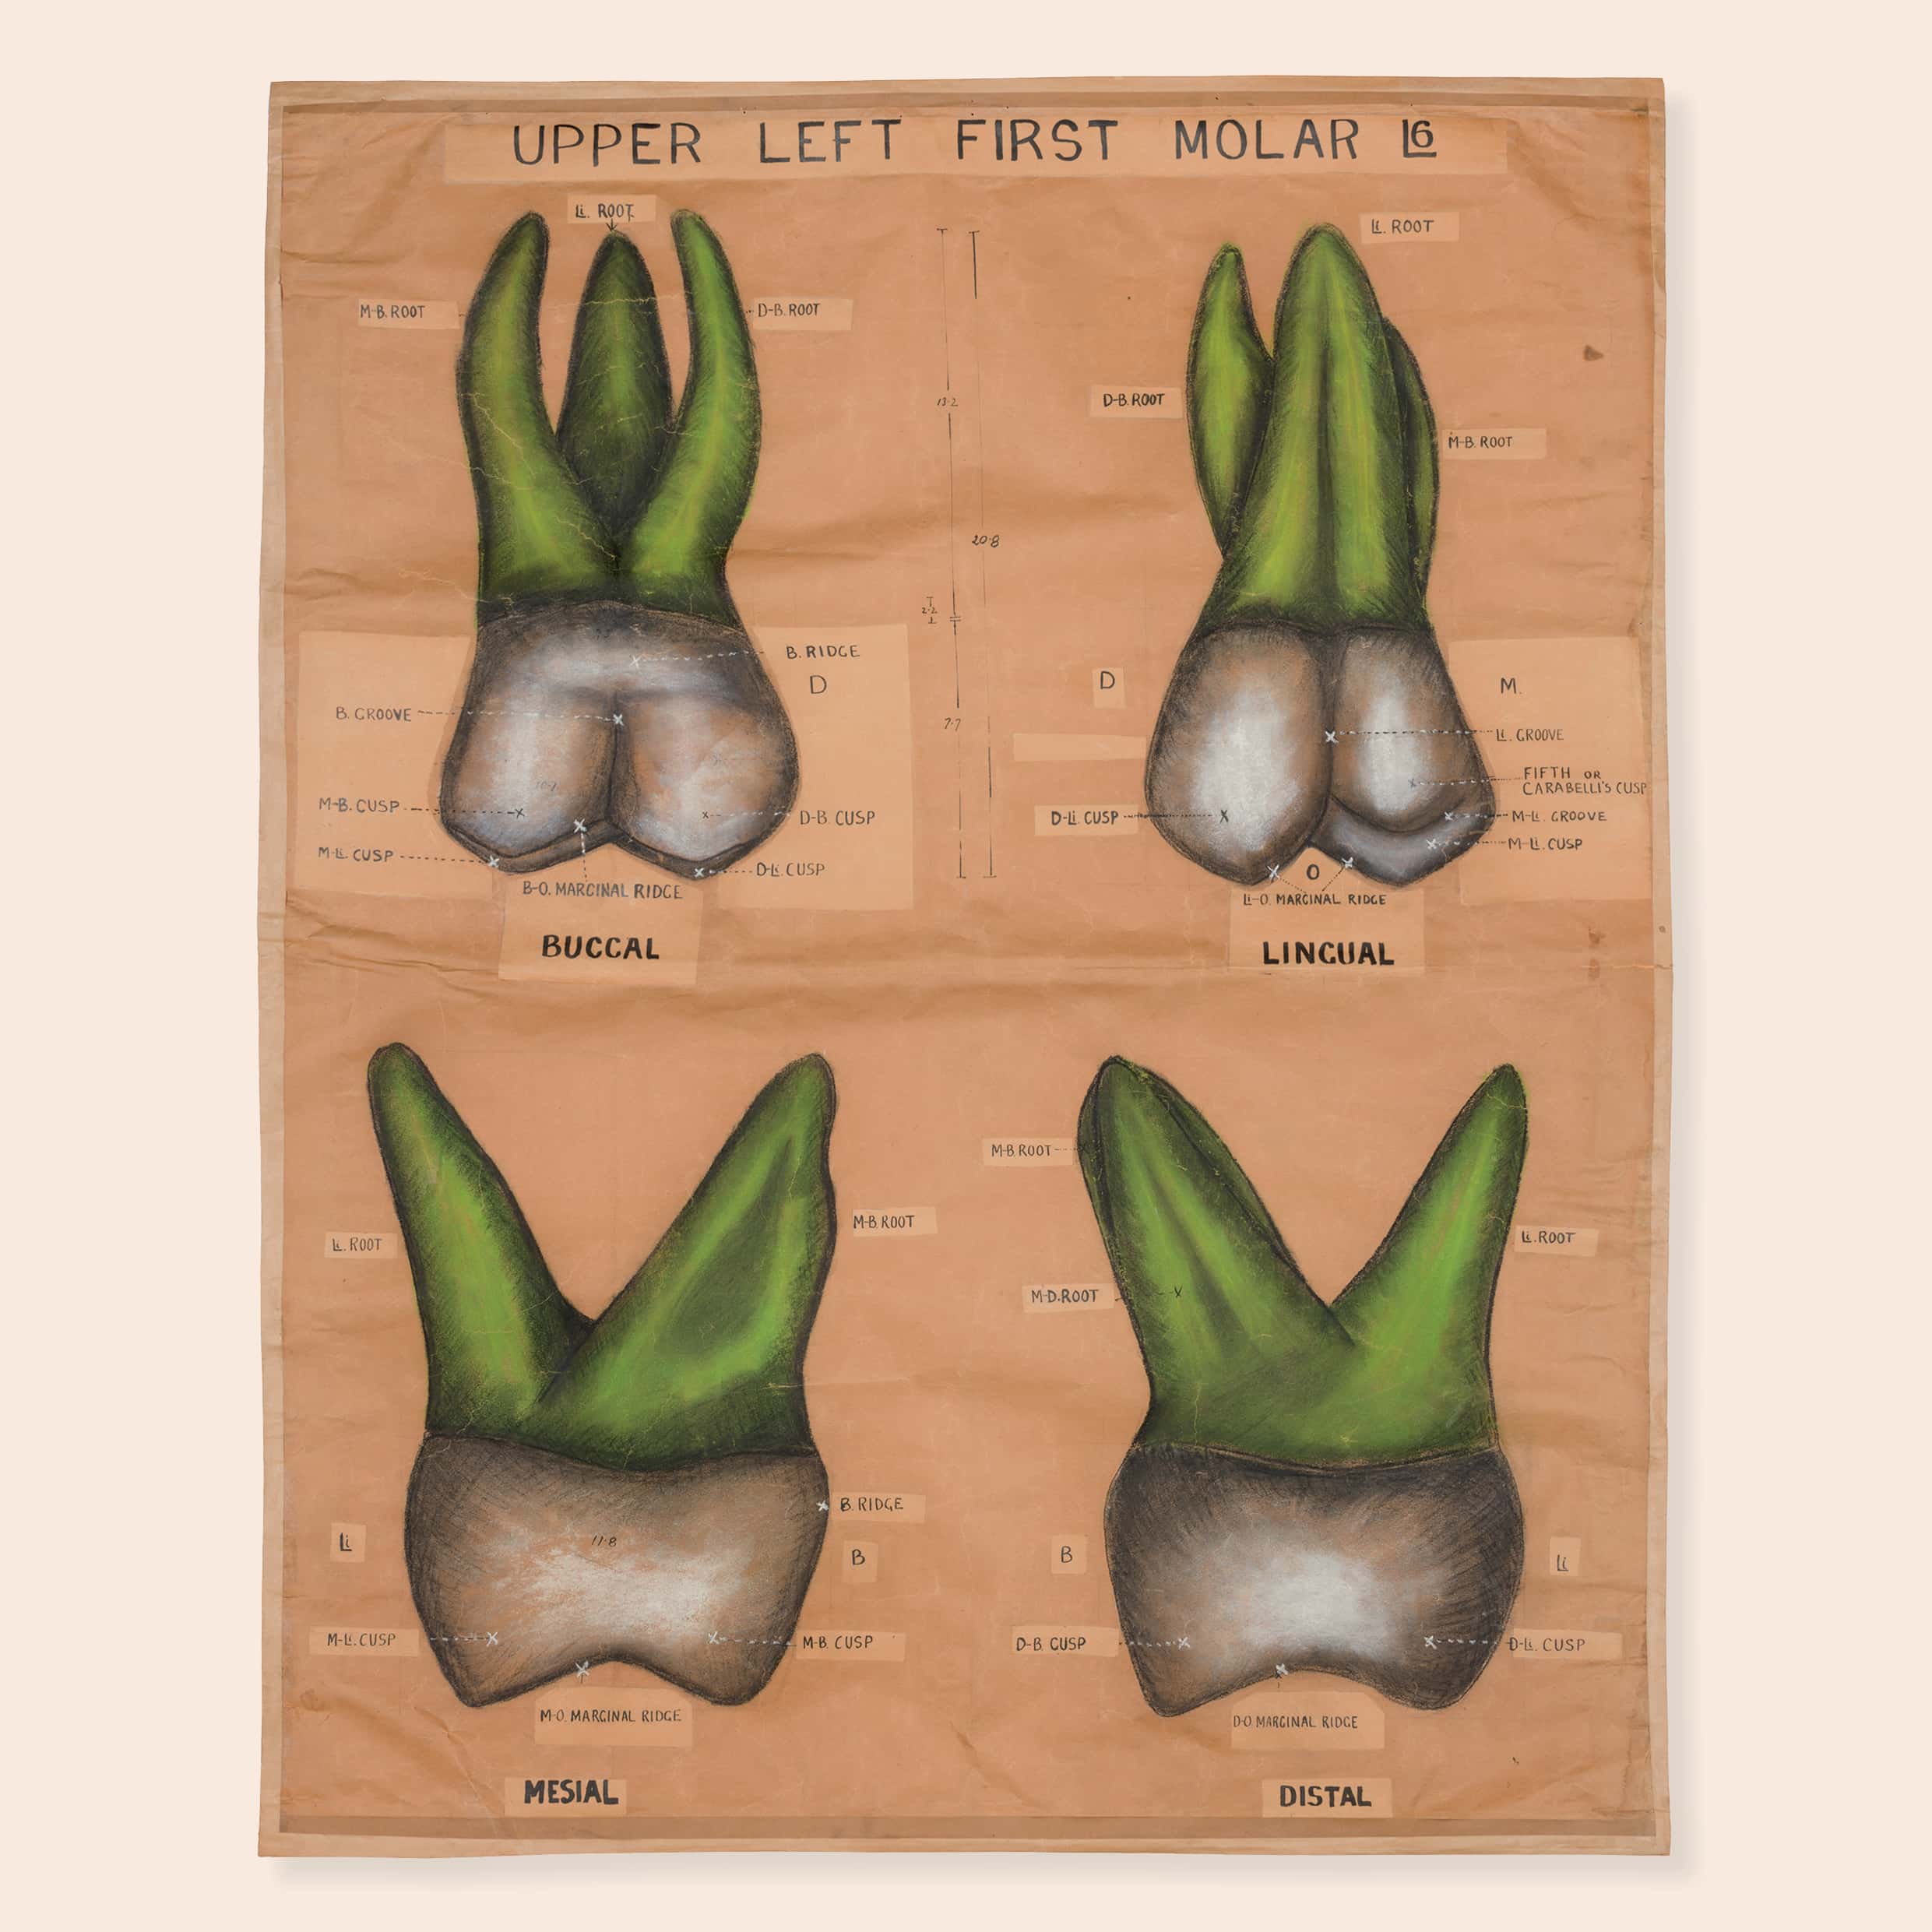  Charles Harold Down (1890–1965), ‘Upper left first molar L6’, from Cat. 112, Teaching aids: drawings, 1920–38, ink and pastel on paper, each sheet 117.0 × 90.0 cm. HFADM 1997, Henry Forman Atkinson Dental Museum, University of Melbourne. 
